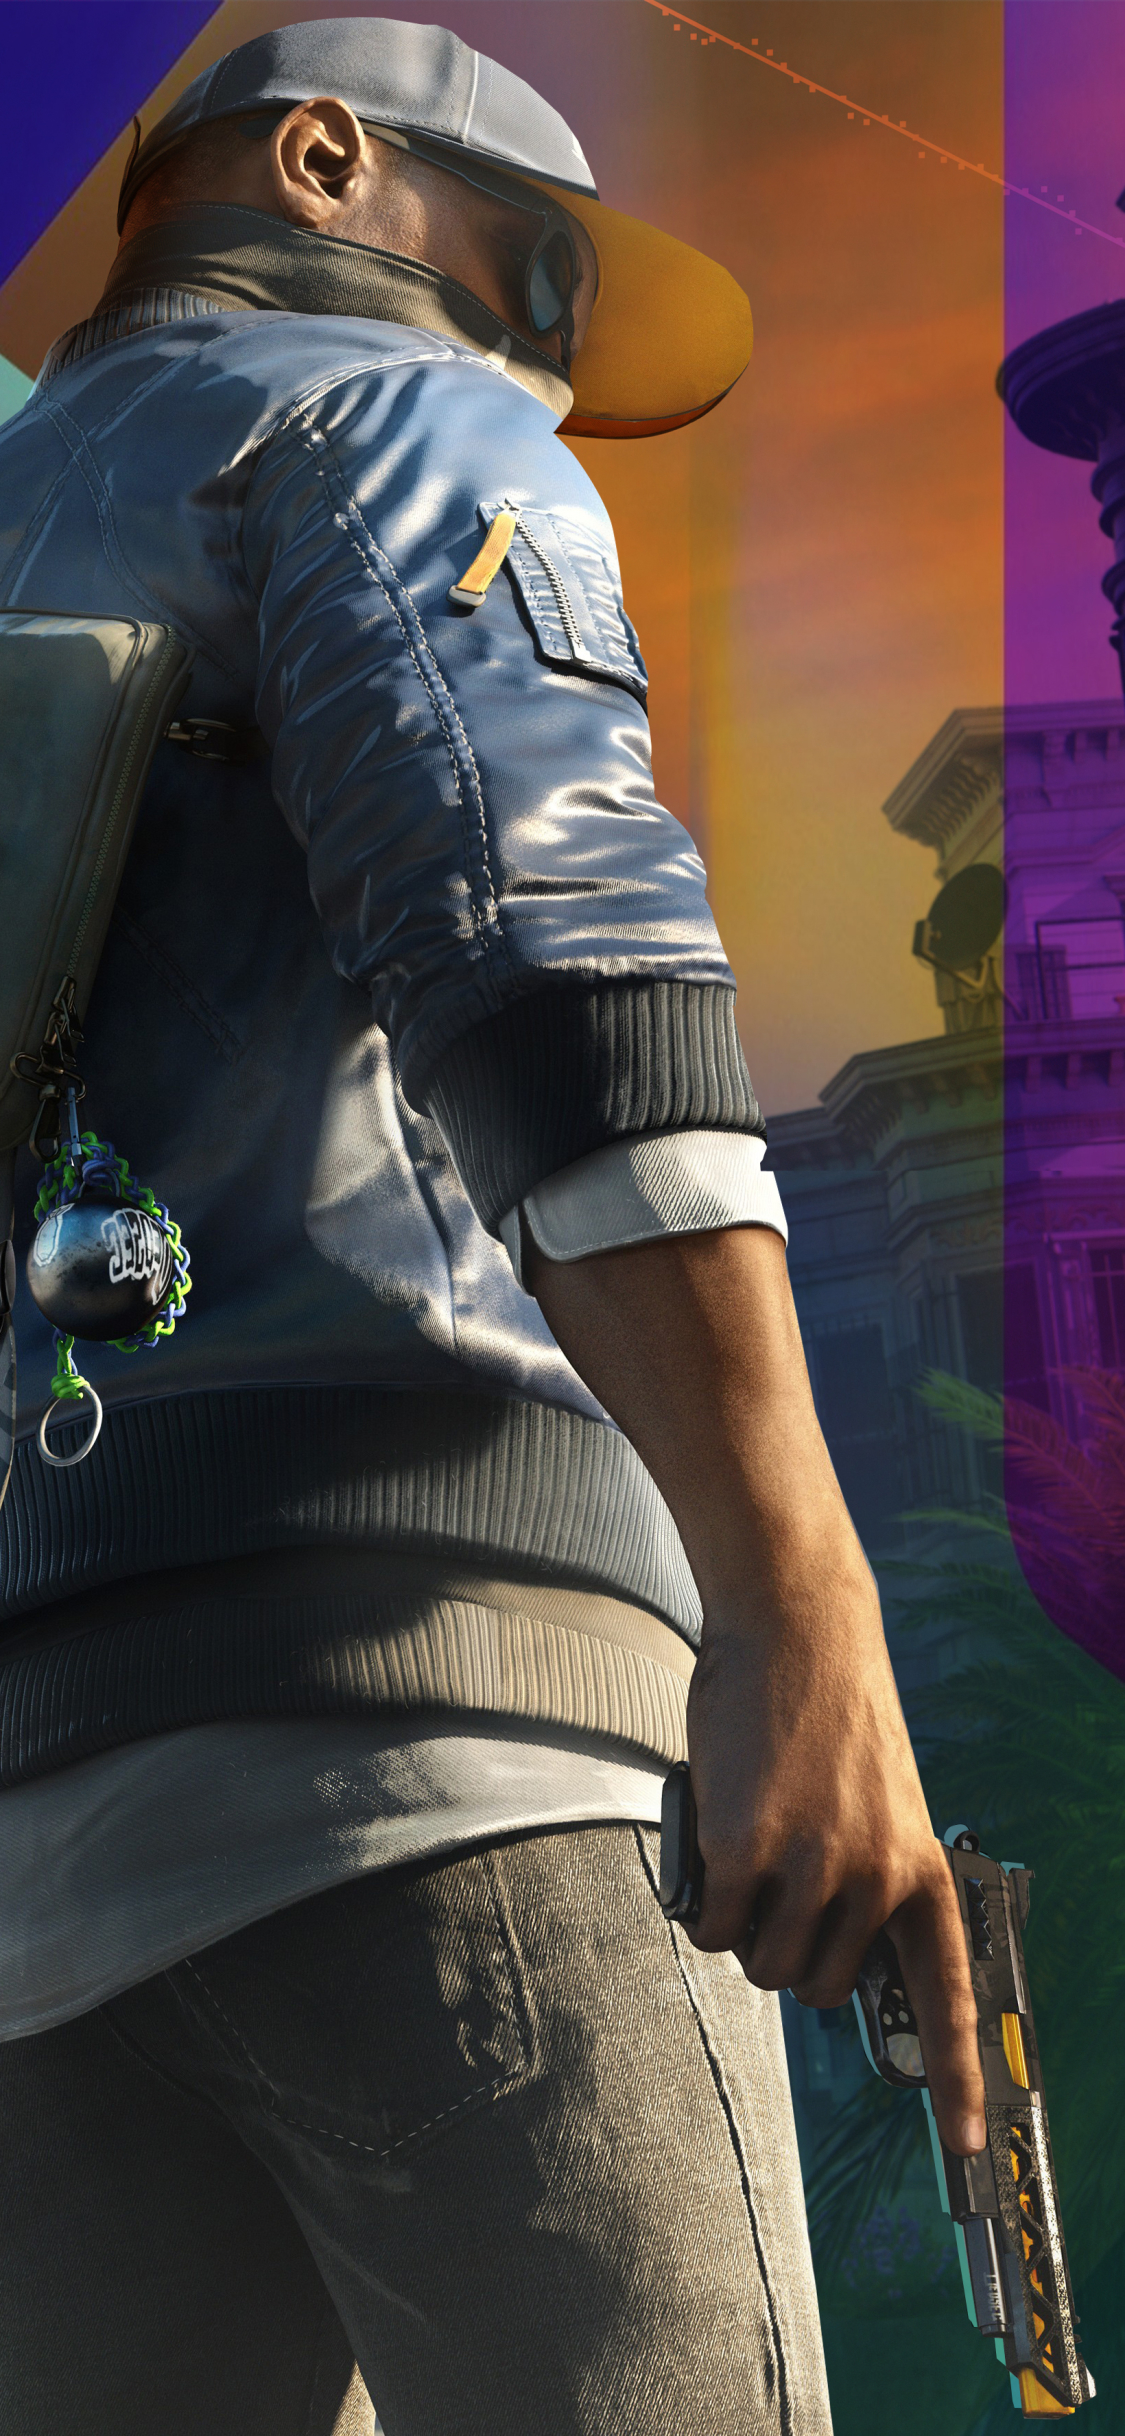 Watch Dogs 2 Phone Wallpaper - Mobile Abyss